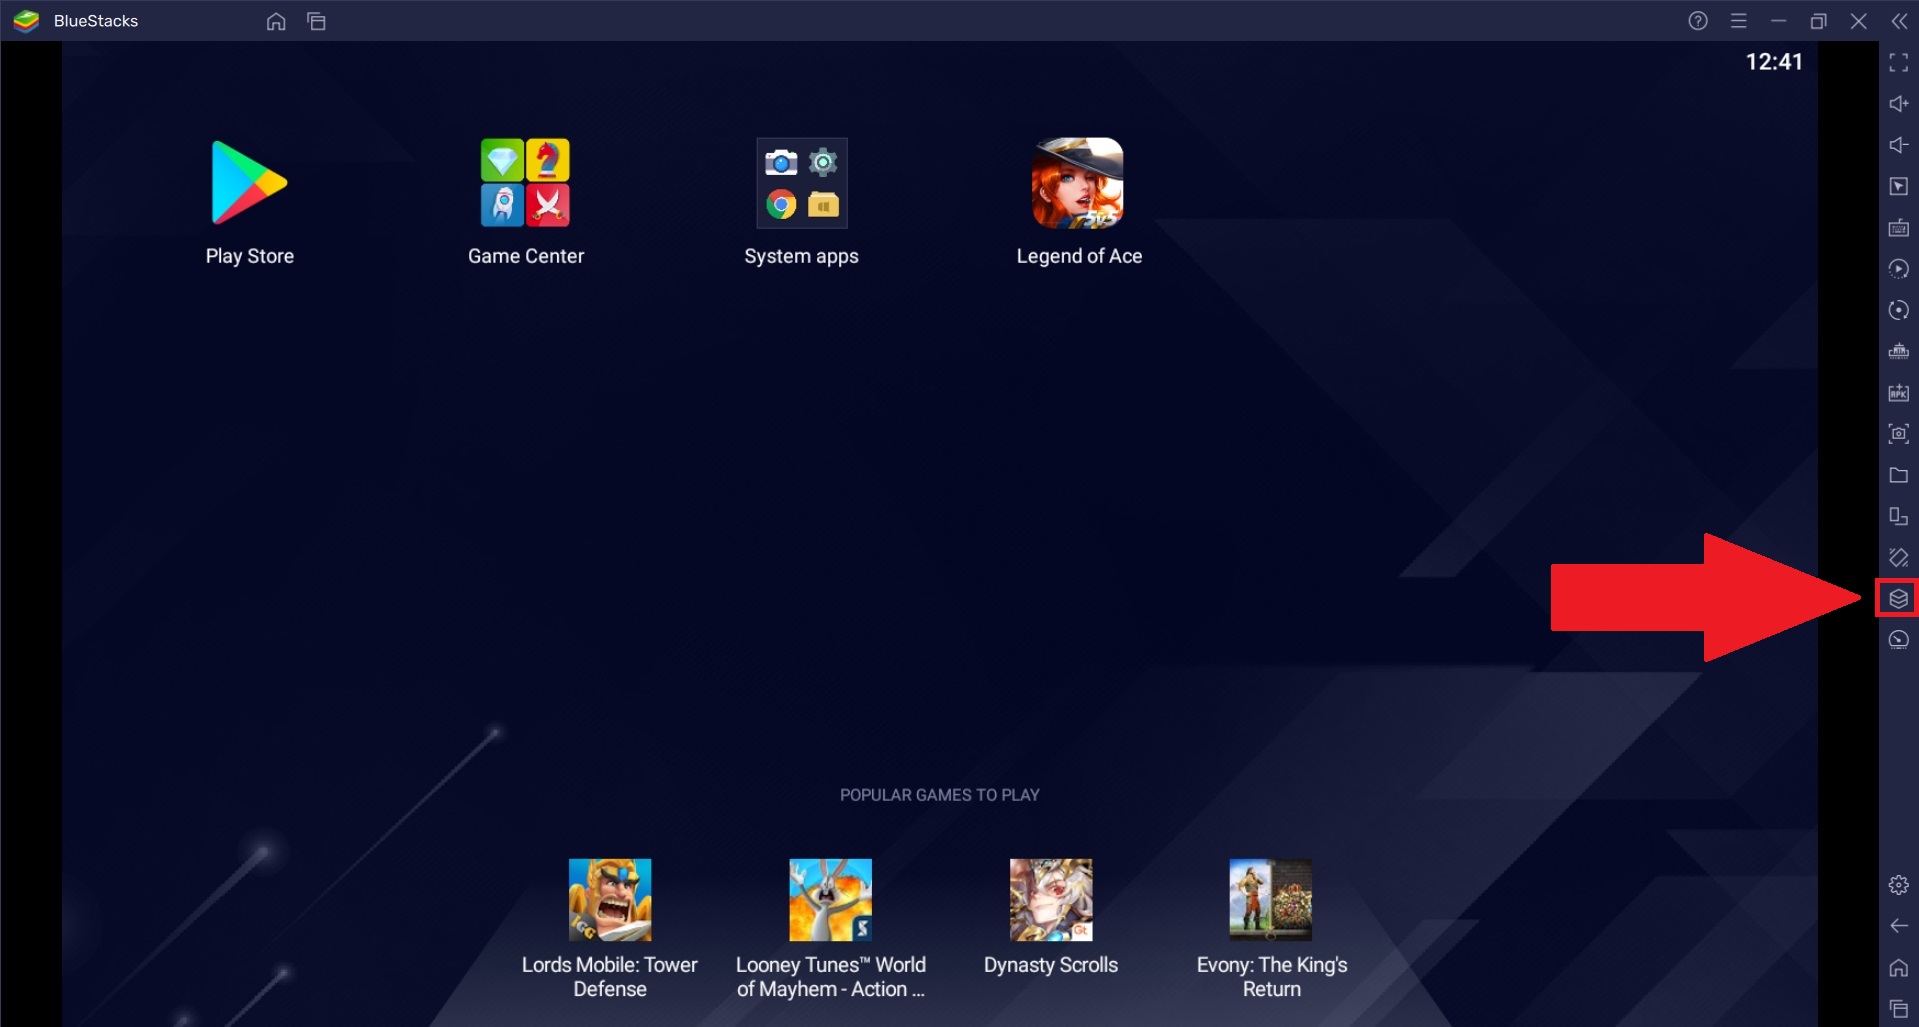 what version of android is bluestacks